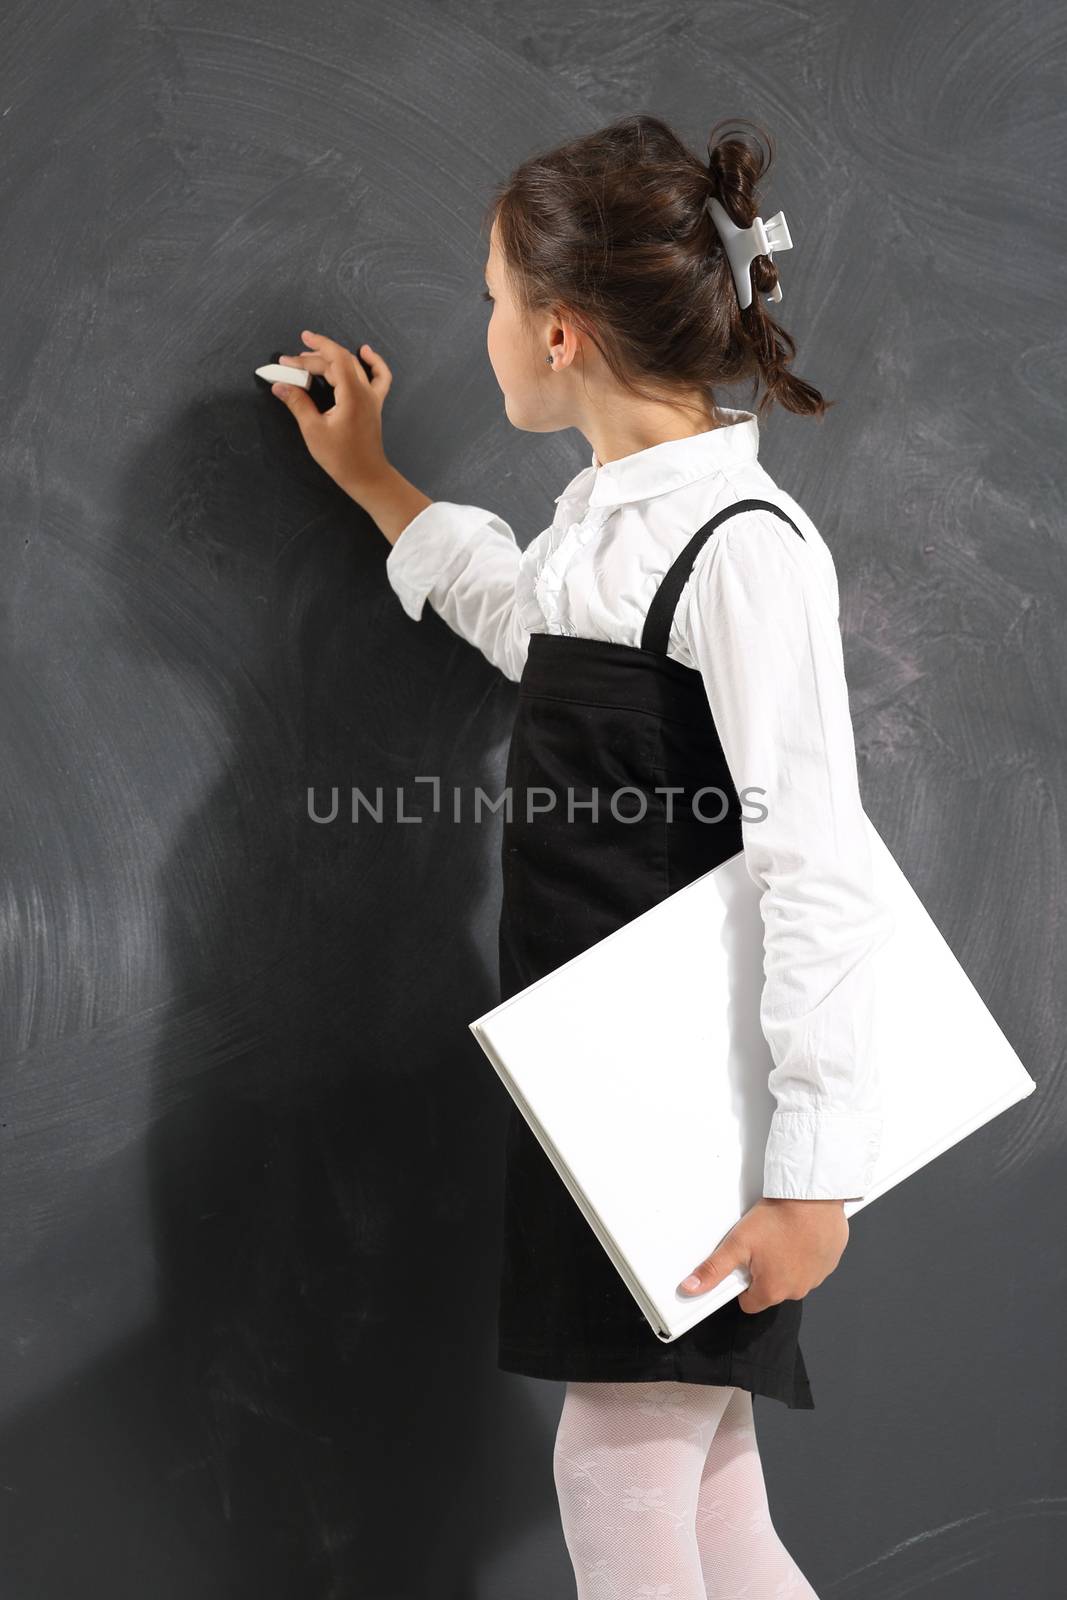 Schoolgirl holding heavy books standing on a background of black wall